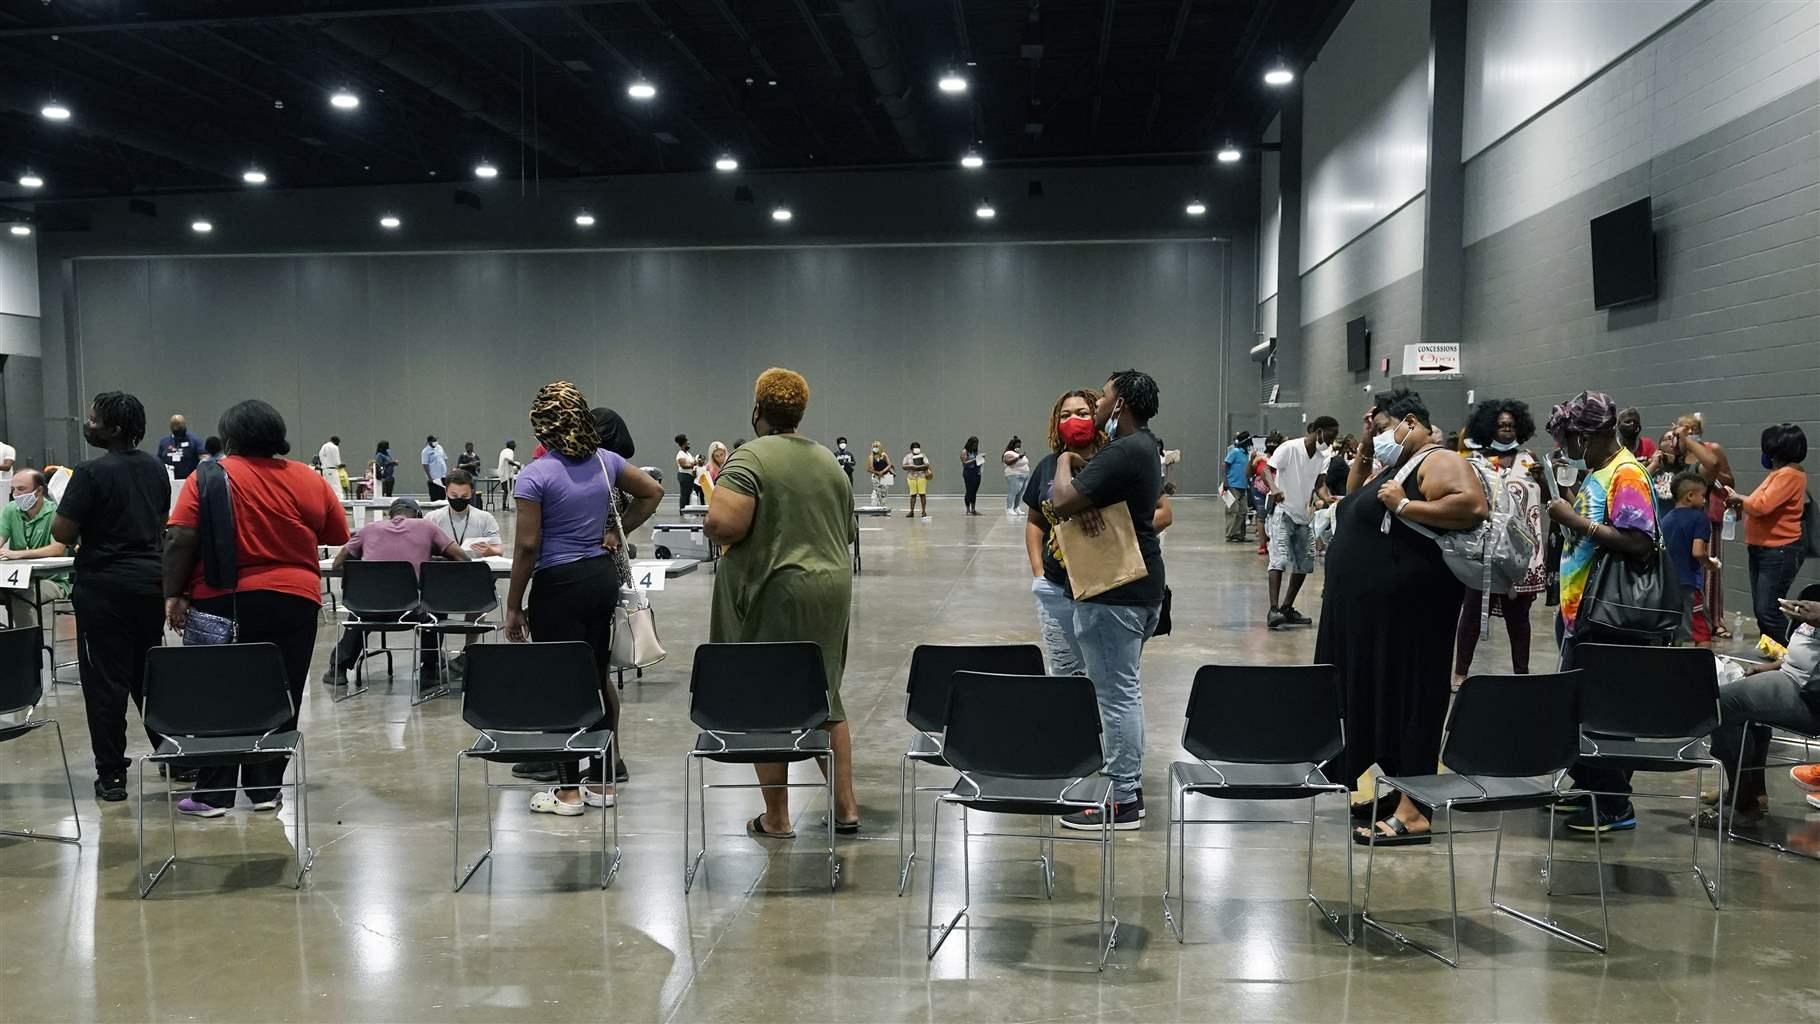 Applicants at a rental assistance fair for Jackson residents at the Mississippi Trademart, line up to be assigned the proper station in the state Fairgrounds, Saturday, July 24, 2021, in Jackson, Miss